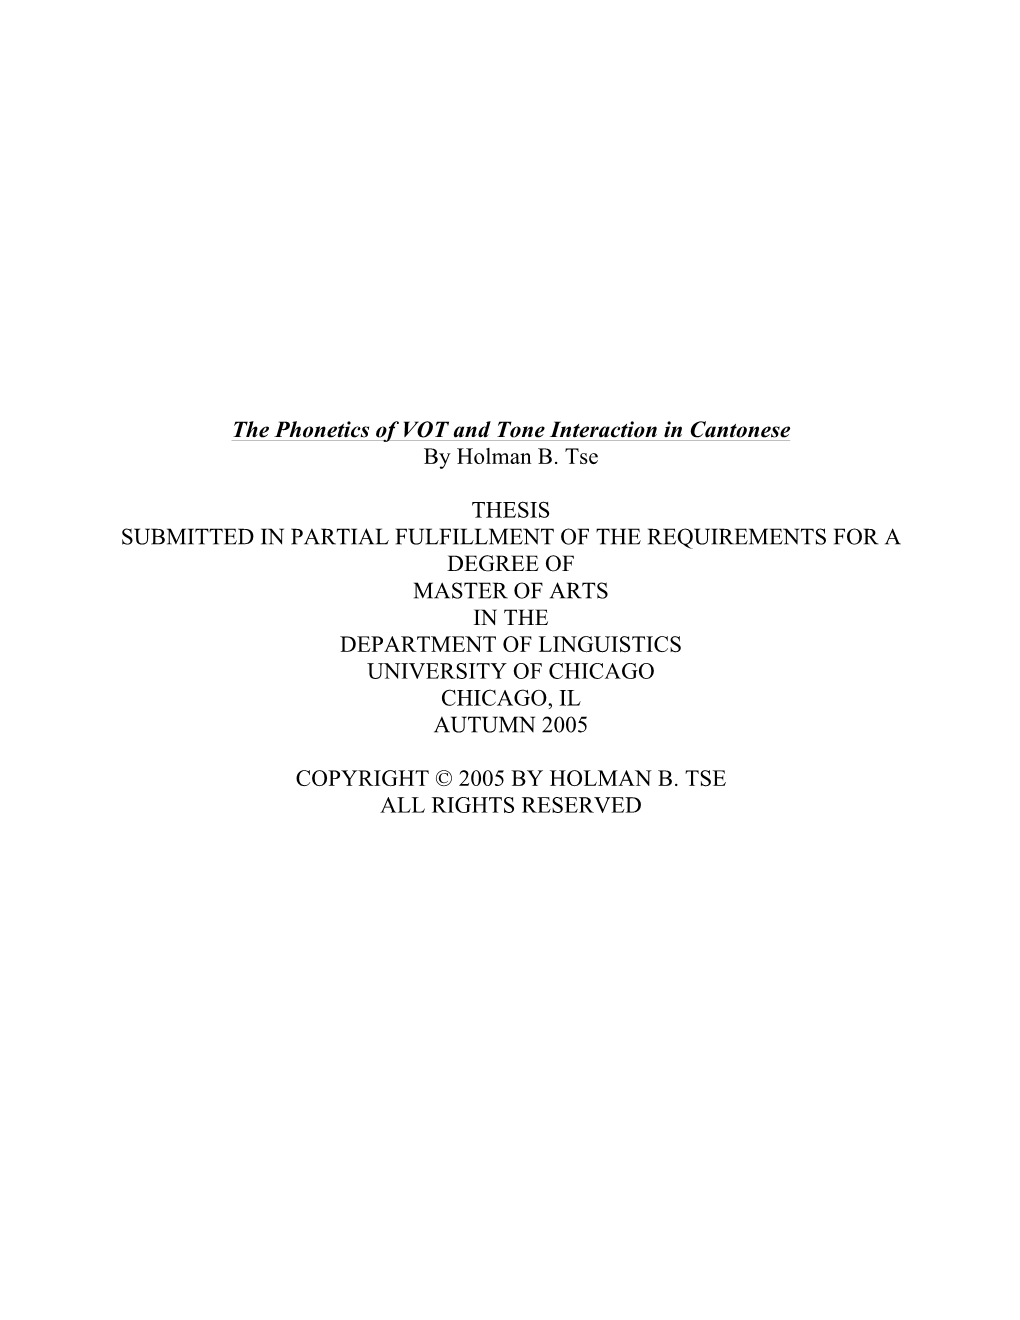 The Phonetics of VOT and Tone Interaction in Cantonese by Holman B. Tse THESIS SUBMITTED in PARTIAL FULFILLMENT of the REQUIREM